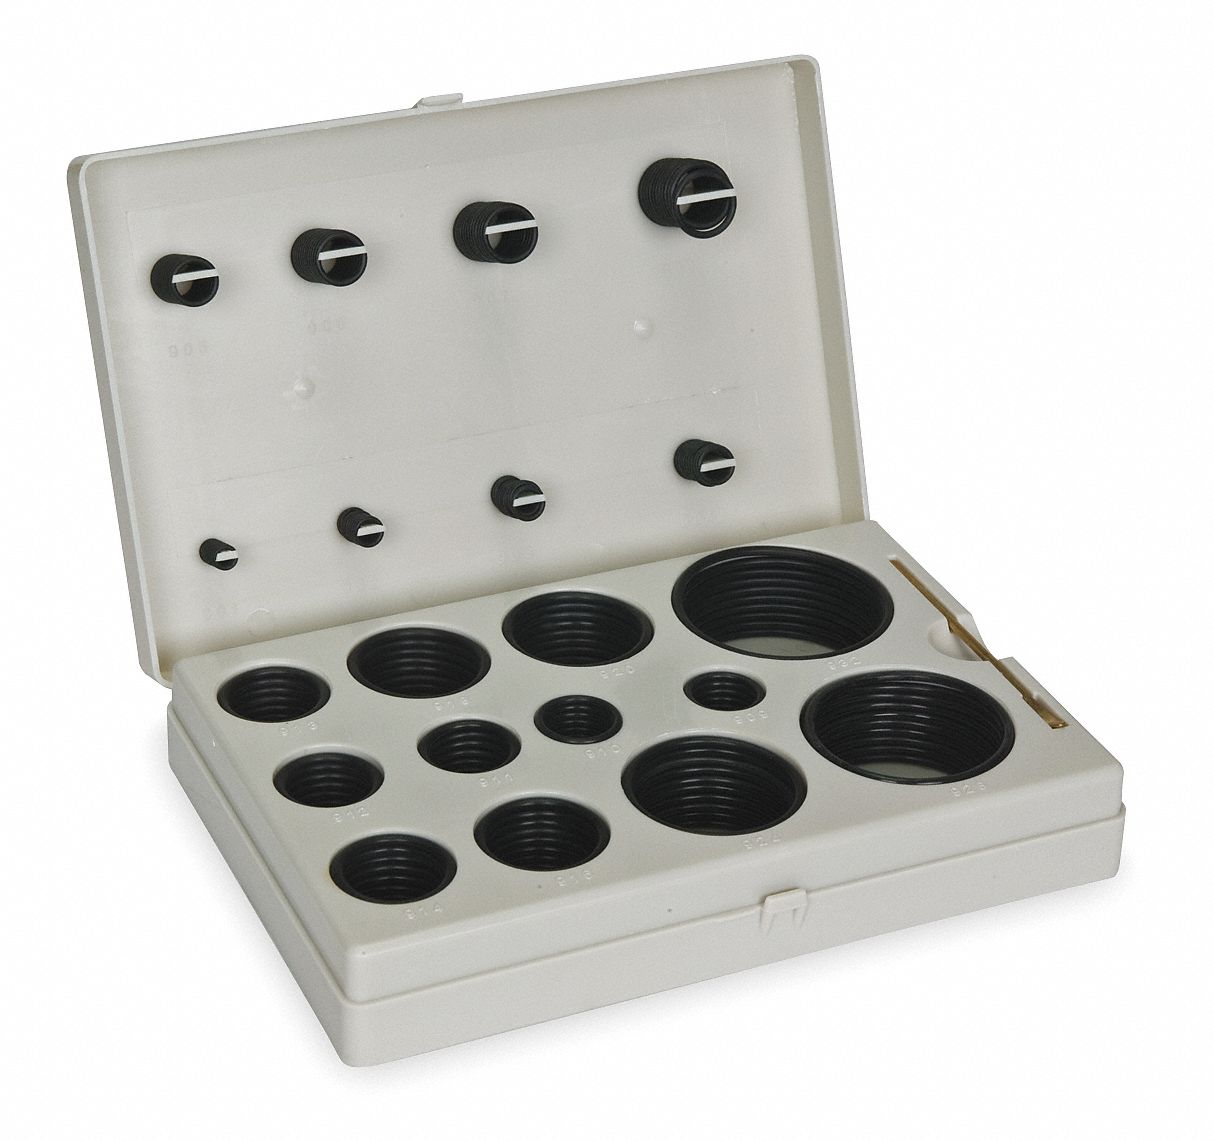  APPROVED O Ring Assortment, Buna N, 90 Shore A SAE, Number of Pieces: 212, Number of Sizes: 20   1RGX8|1RGX8   